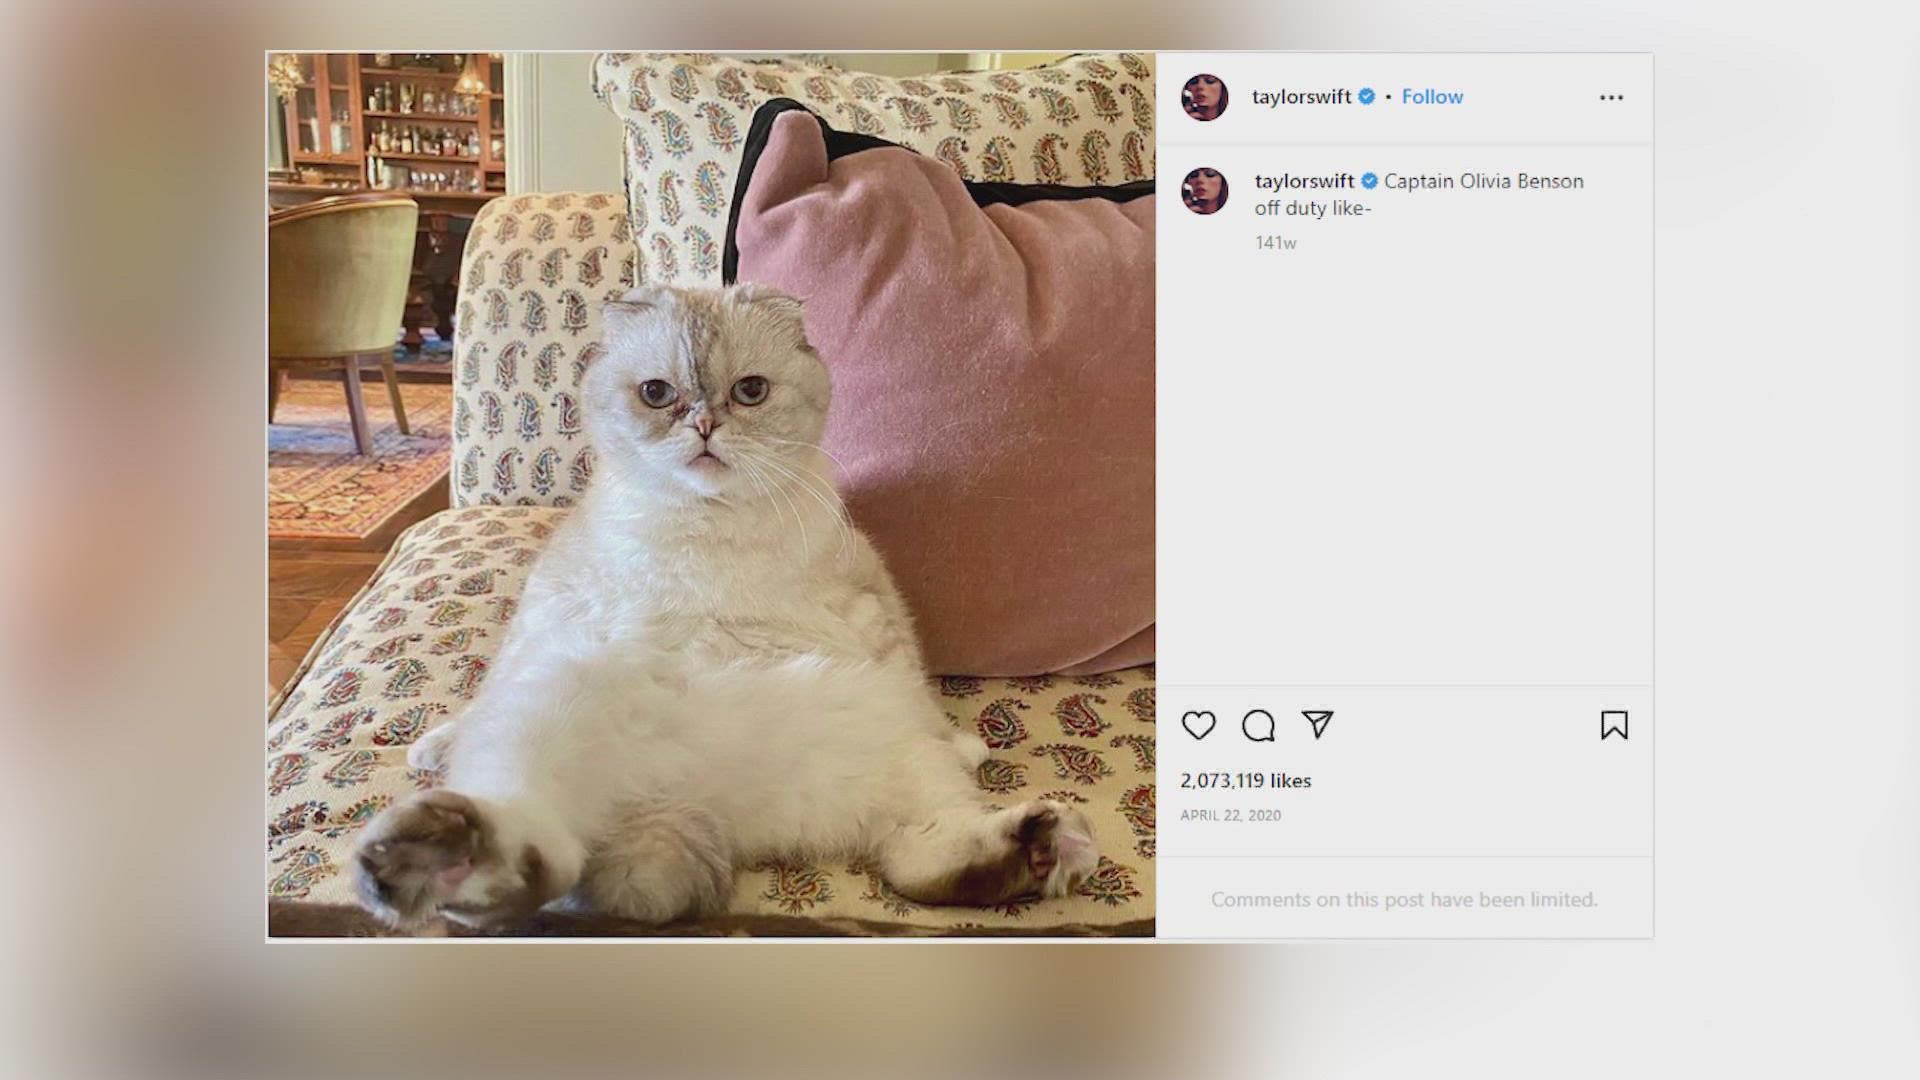 Swift's cat Olivia Benson and Oprah's five dogs respectively have the second and third highest value according to a study using Instagram analytics.